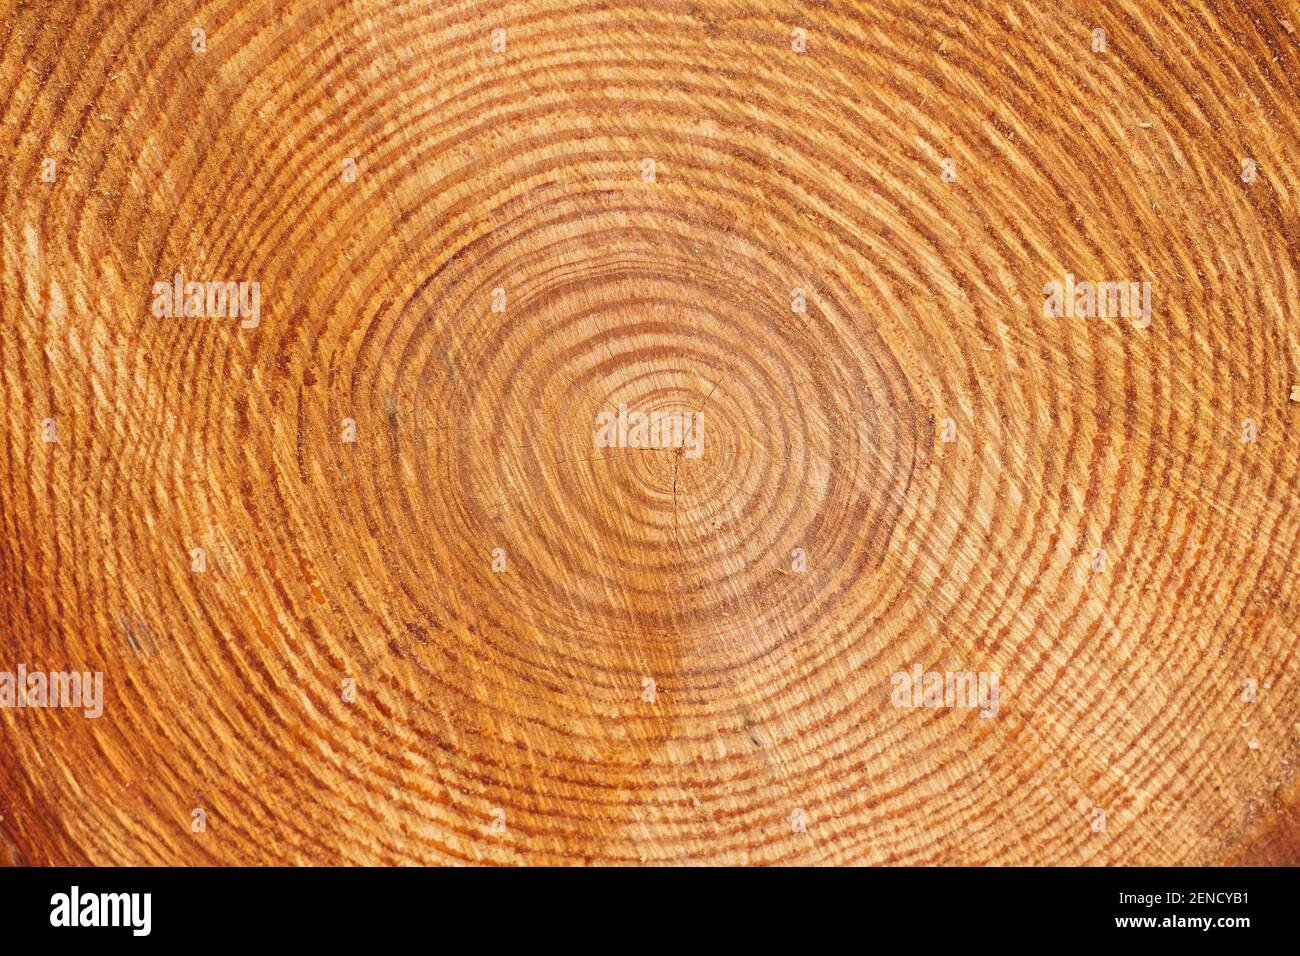 Tree Trunk Cross Cut Wood Texture Stock Image - Image of annual